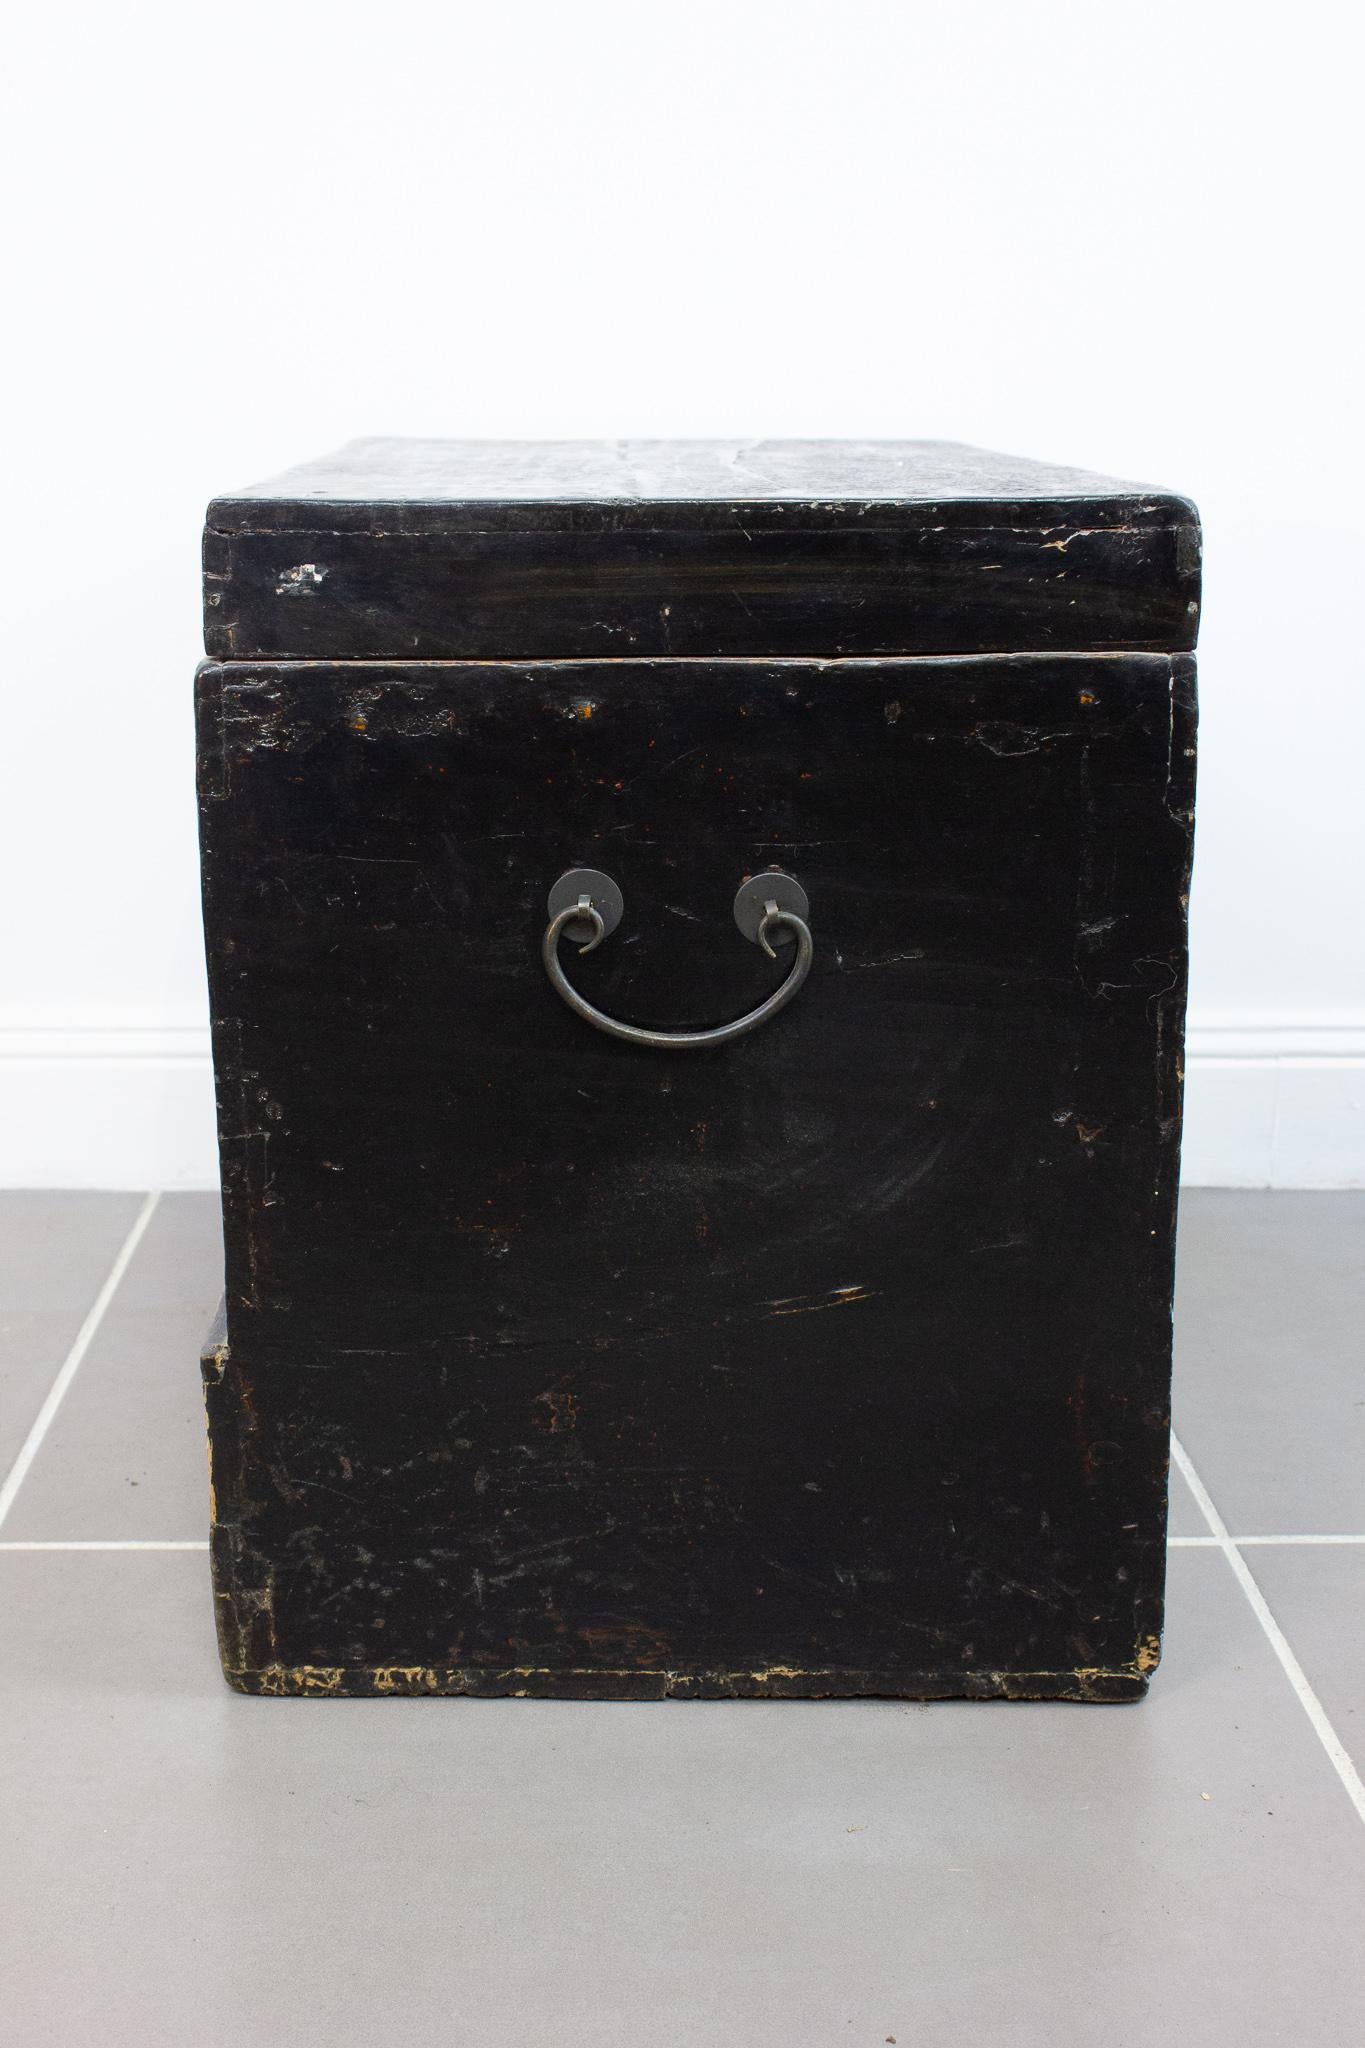 Charming Chinese chest in lacquered wood dating from the end of the 19th / beginning of the 20th century. This trunk is strongly marked by its Asian appearance, particularly at the level of the lock and the handles. It is decorated with flower